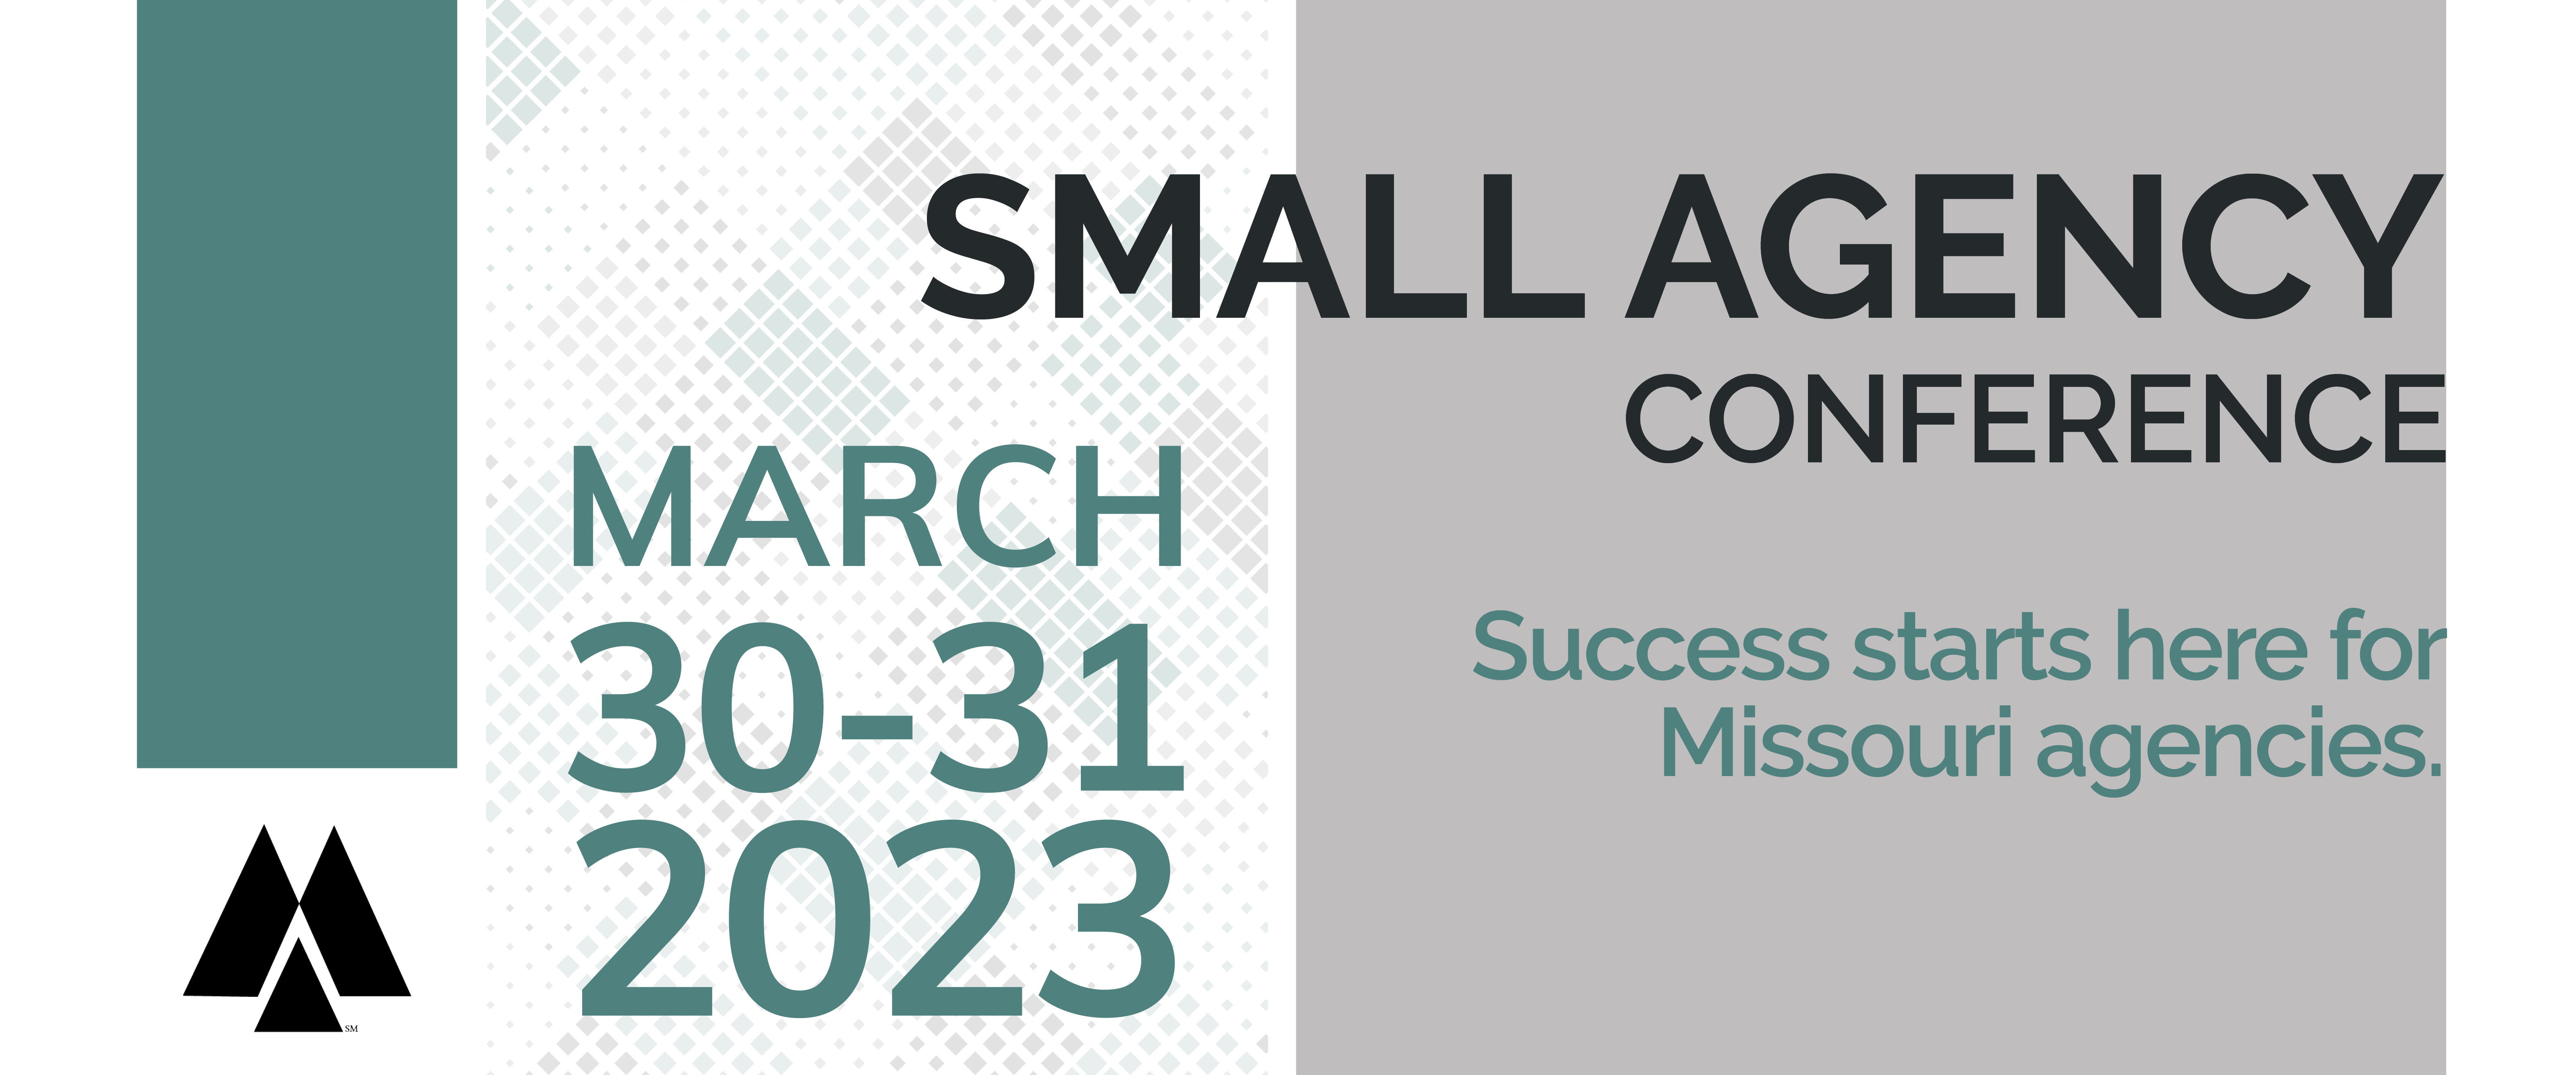 2023 Small Agency Conference